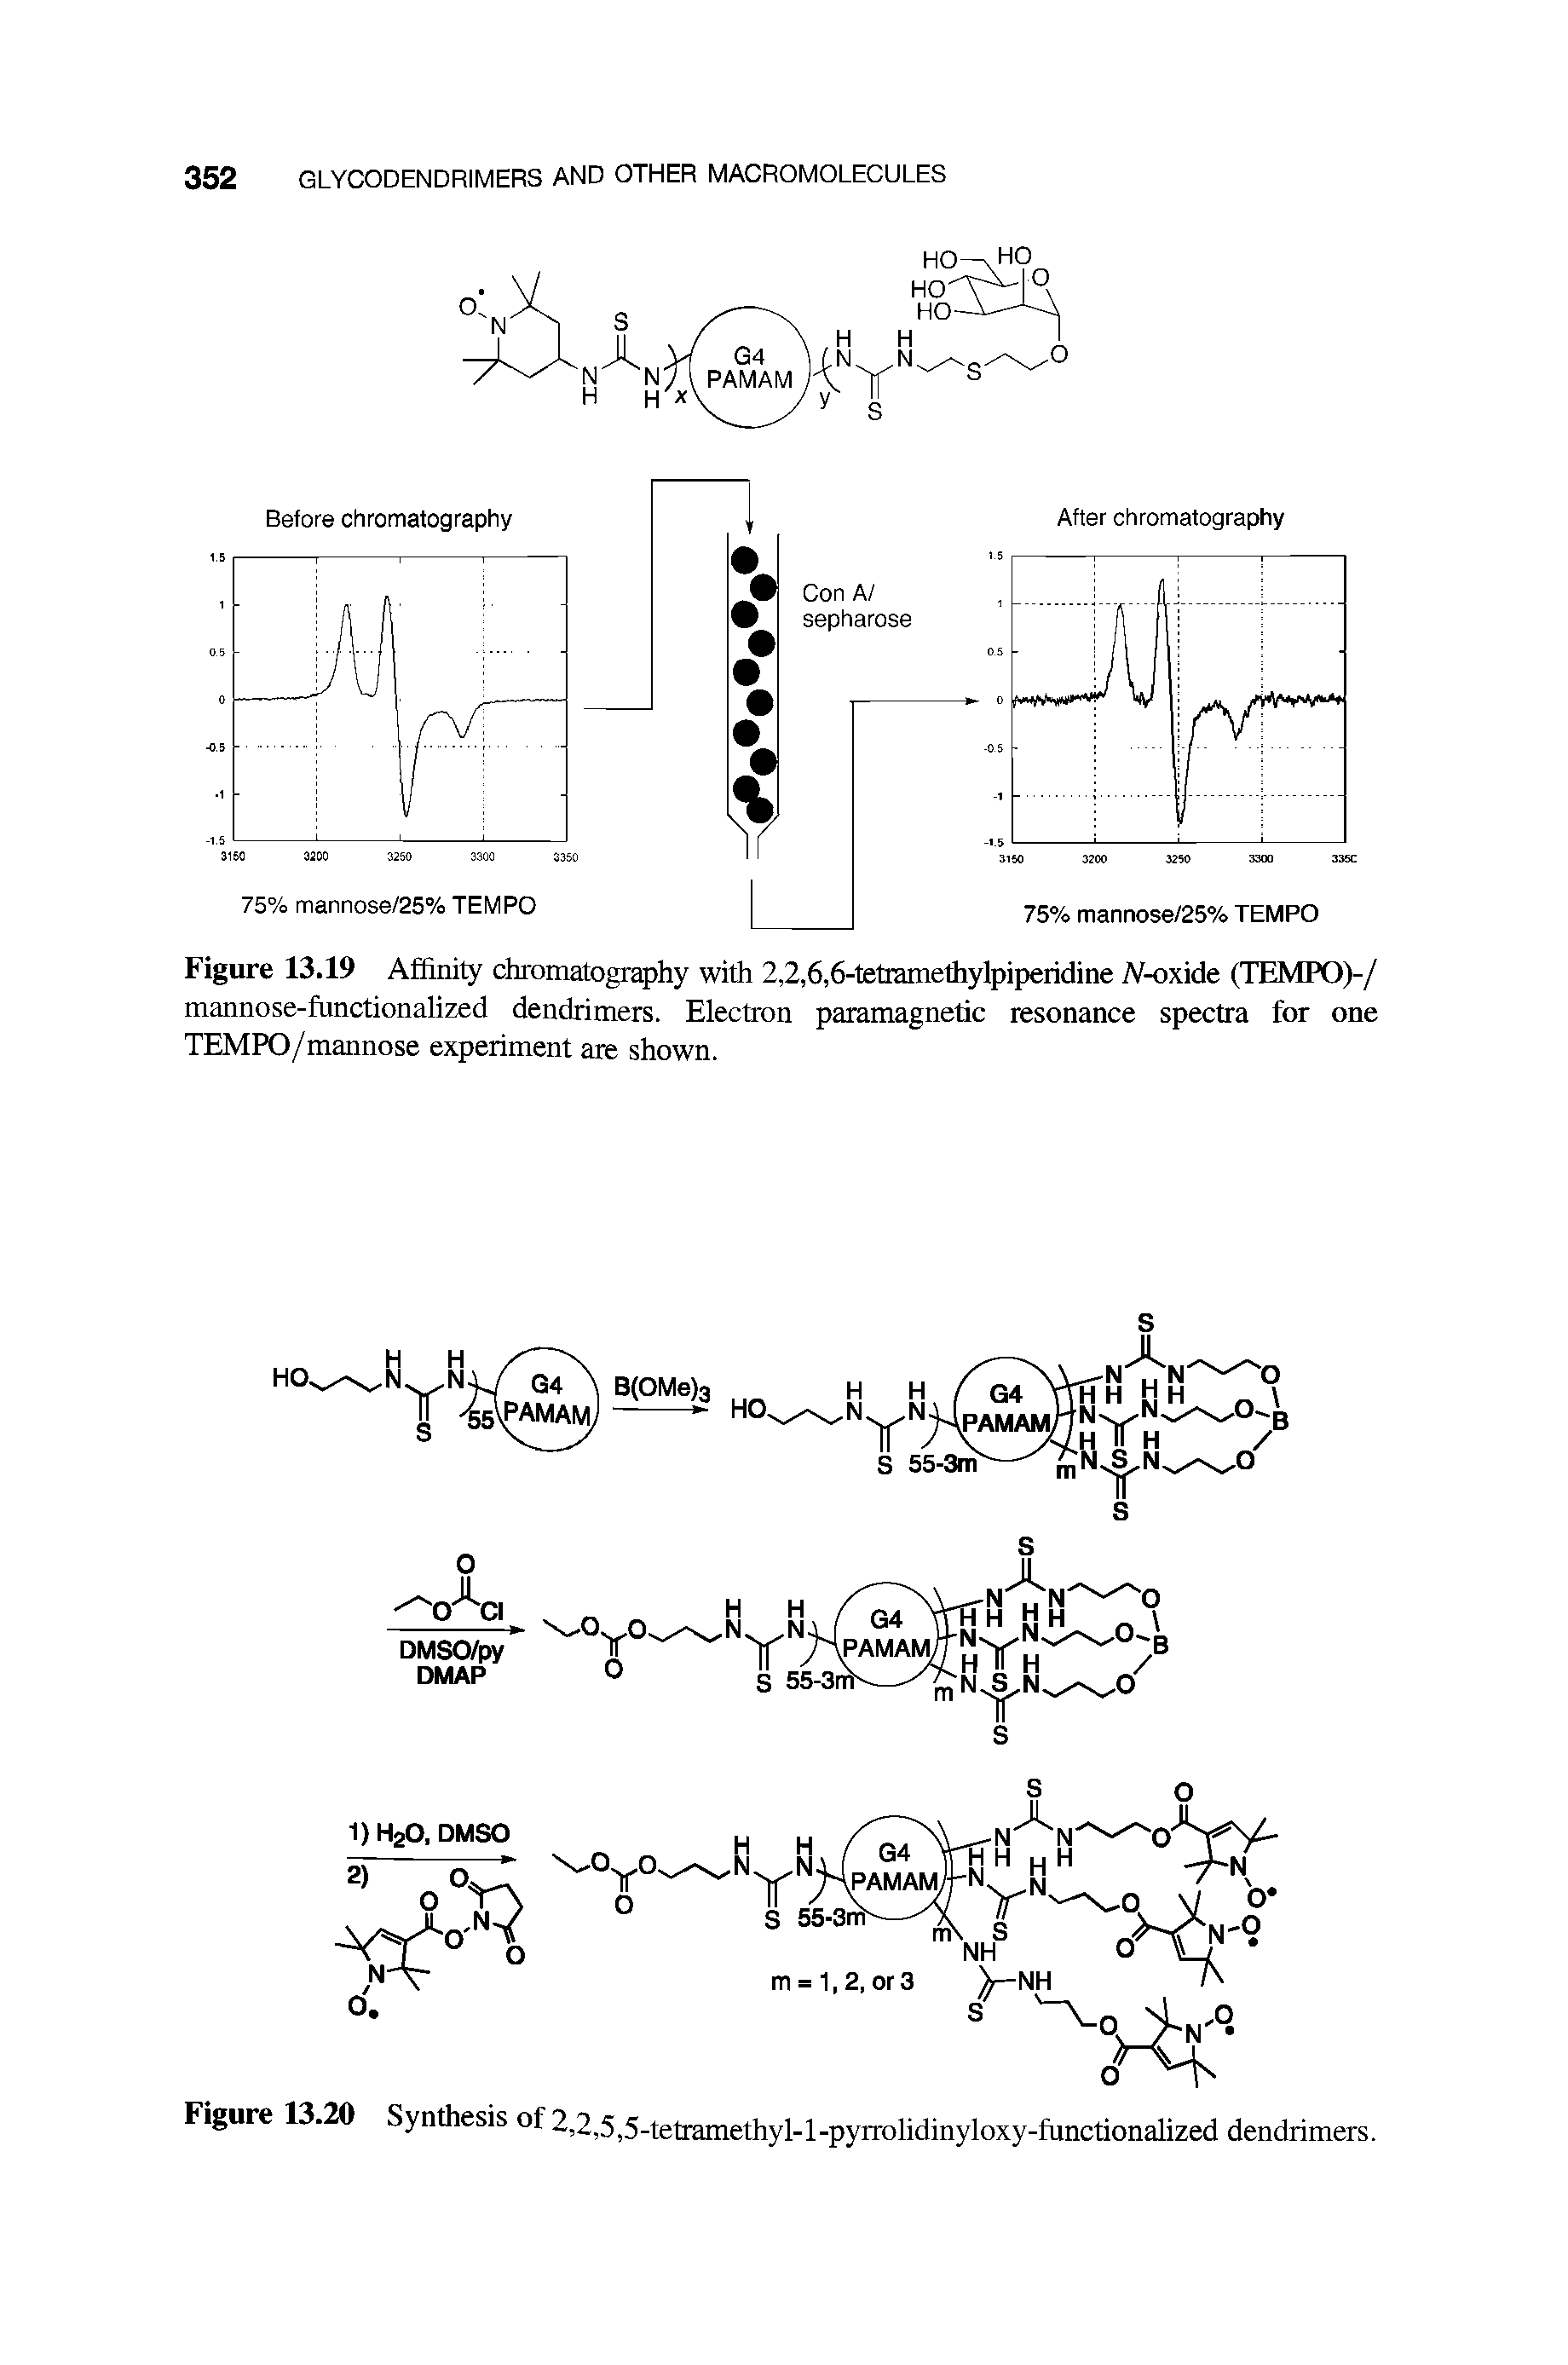 Figure 13.19 Affinity chromatography with 2,2,6,6-tetiamethylpiperidine A-oxide (TEMPO)-/ mannose-functionalized dendrimers. Electron paramagnetic resonance spectra for one TEMPO/mannose experiment are shown.